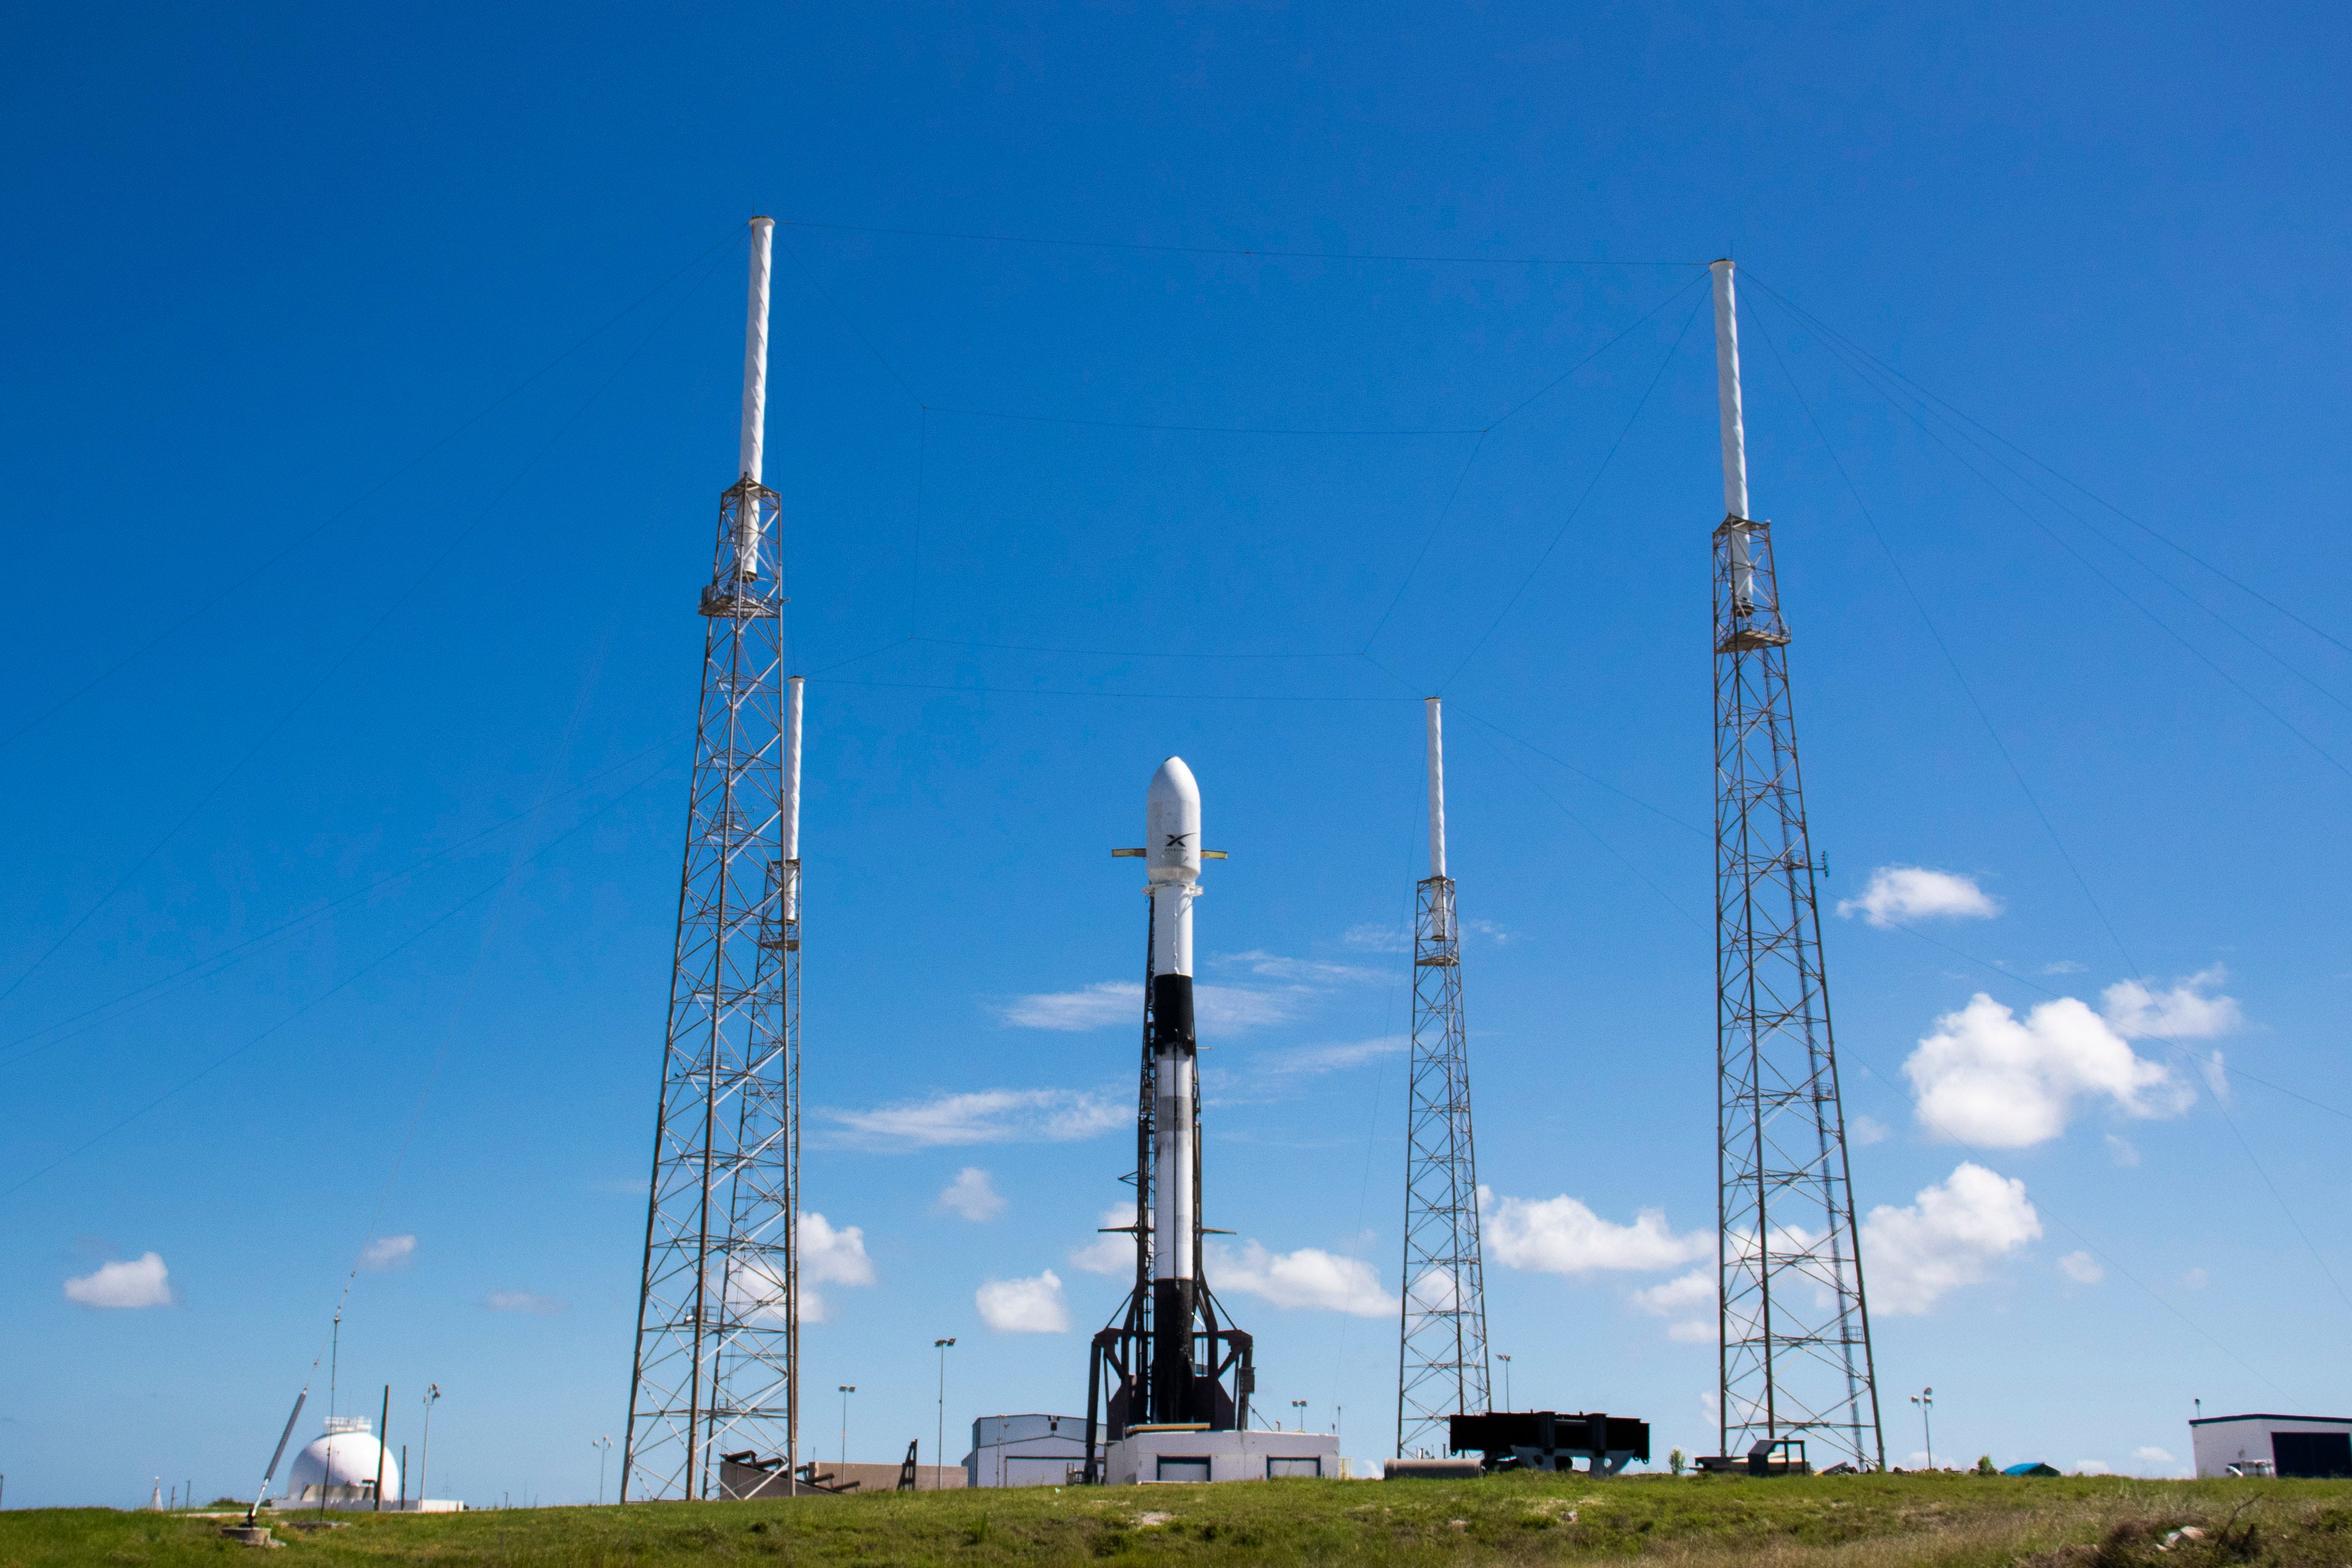 SpaceX's Falcon 9 rocket will deploy 3 Planet SkySats and 58 Starlink satellites -Watch It Live!